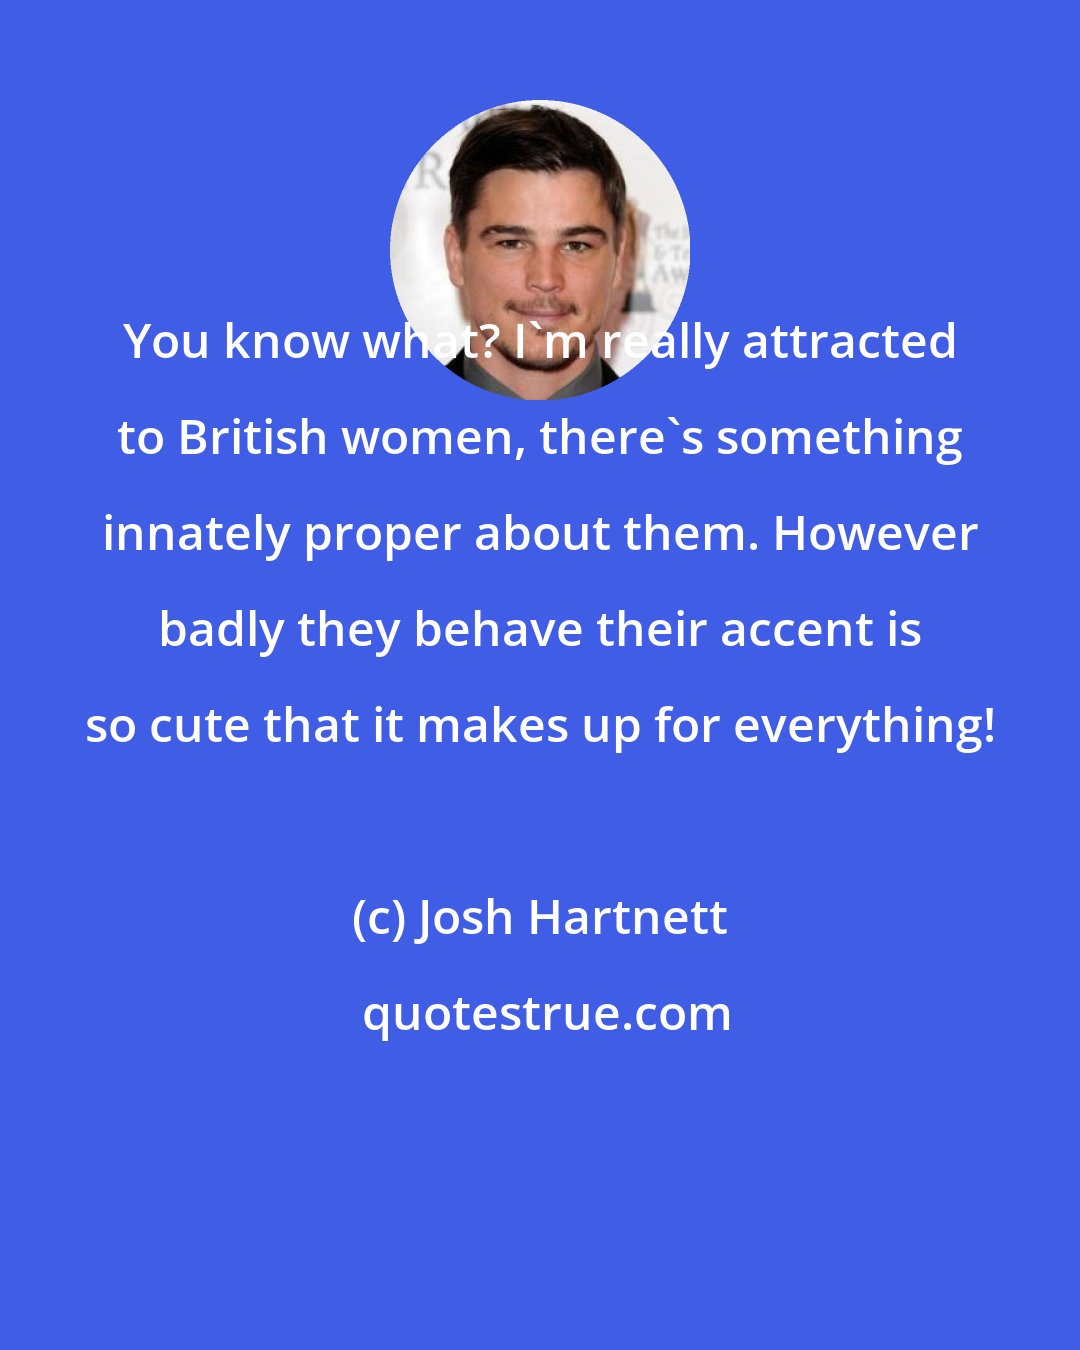 Josh Hartnett: You know what? I'm really attracted to British women, there's something innately proper about them. However badly they behave their accent is so cute that it makes up for everything!